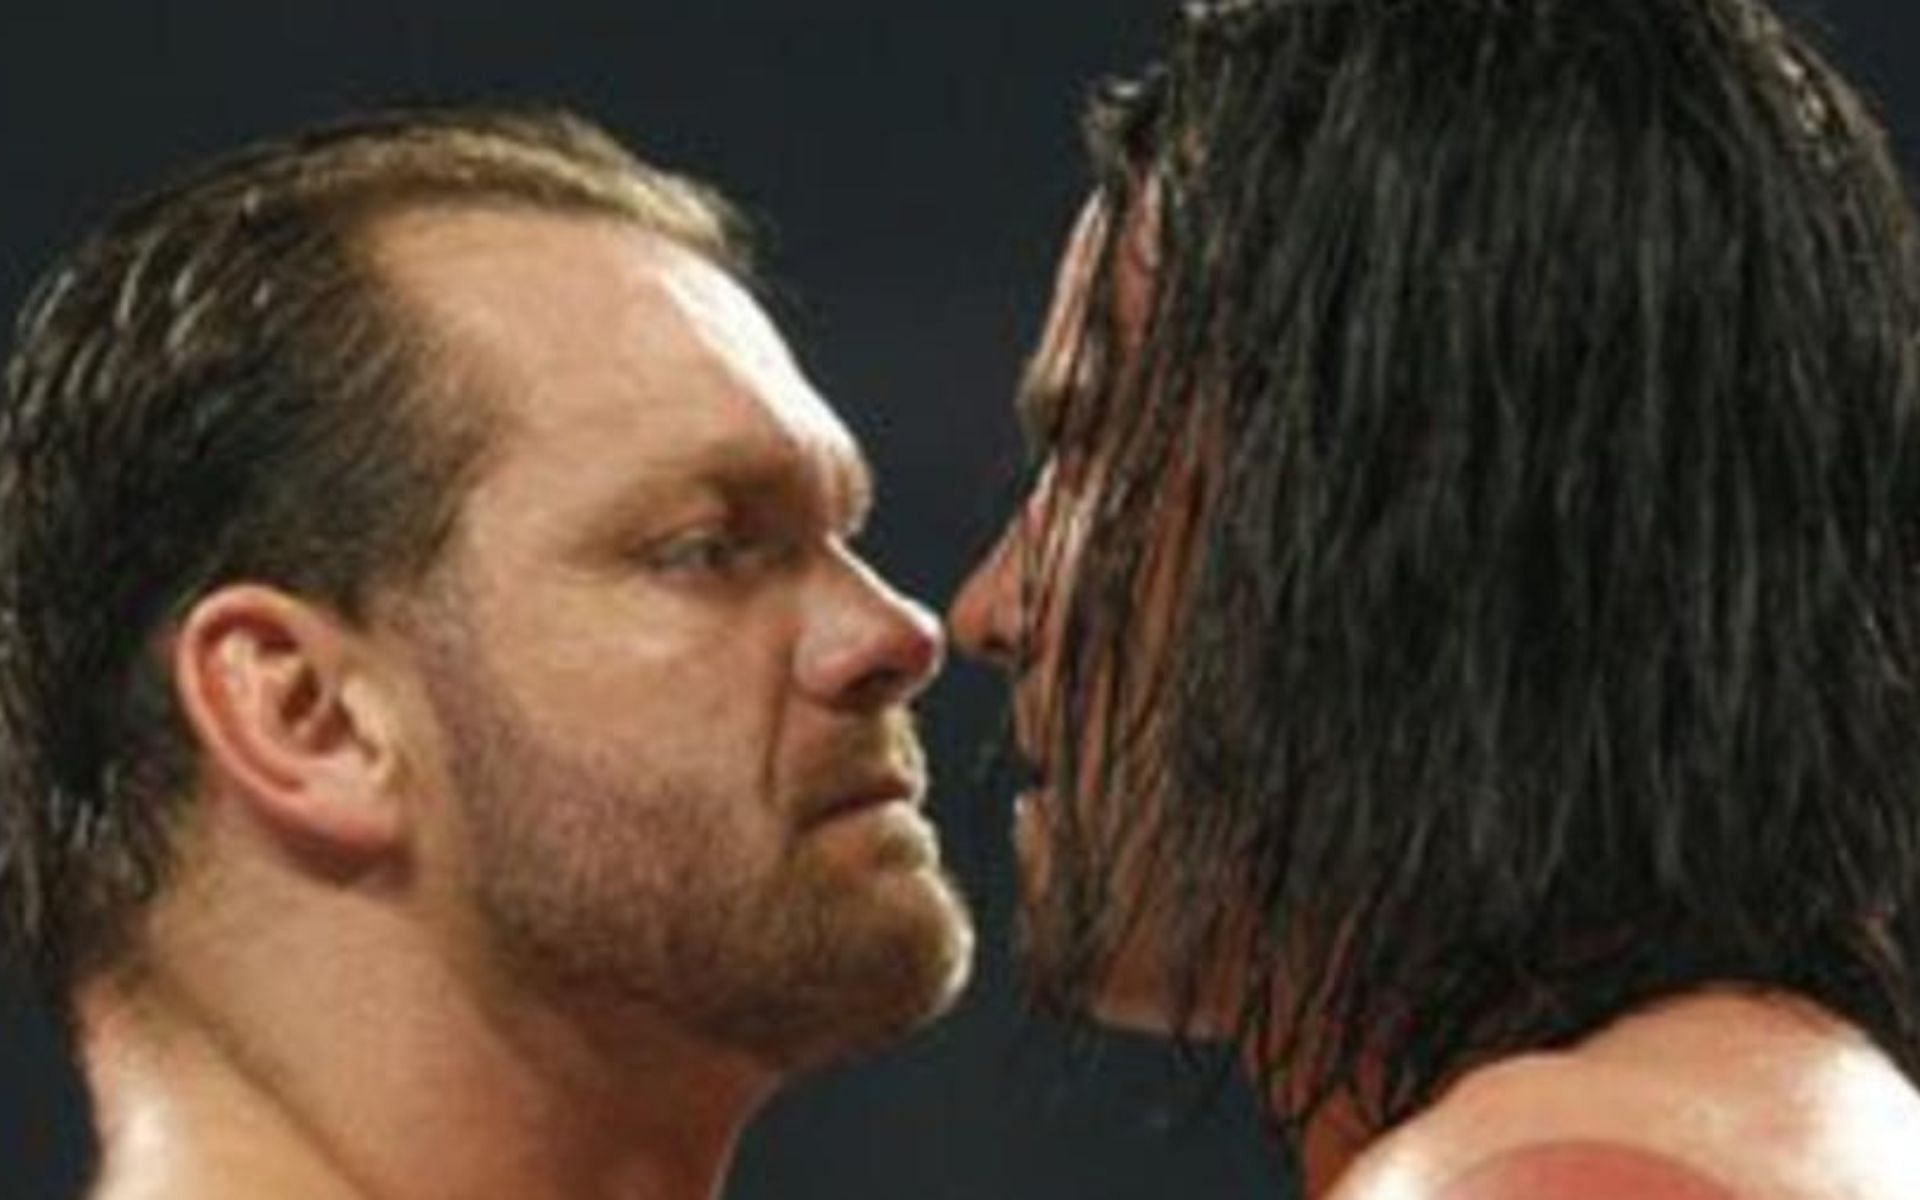 Chris Benoit and CM Punk stare one another down.